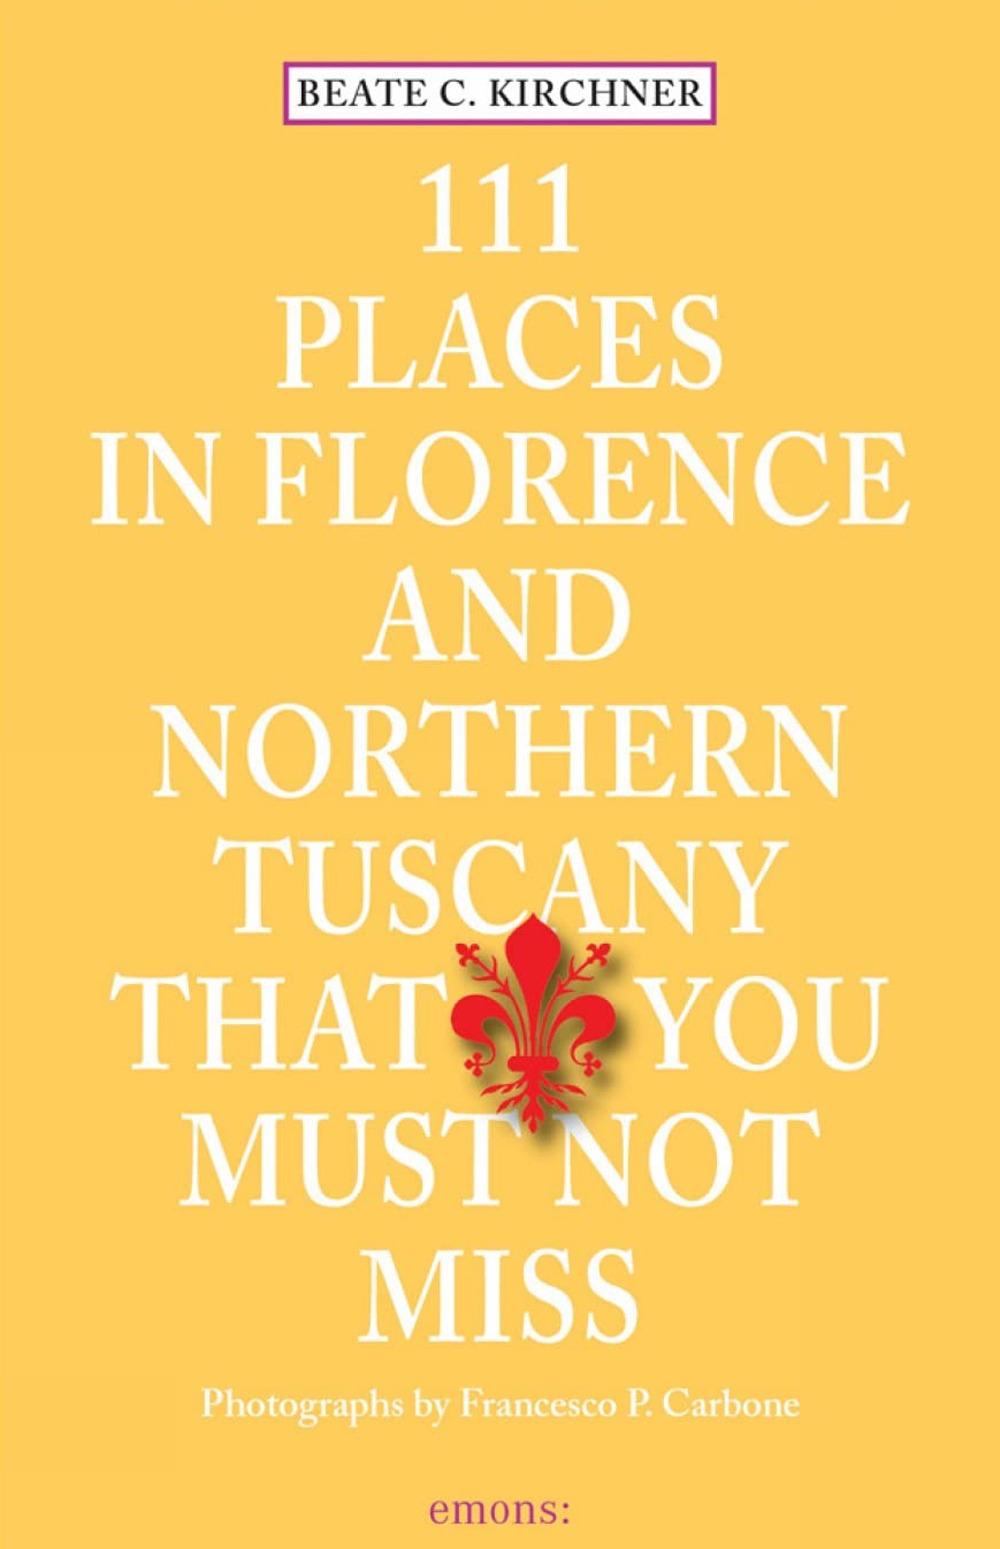 111 places in Florence and northern tuscany that you must not miss